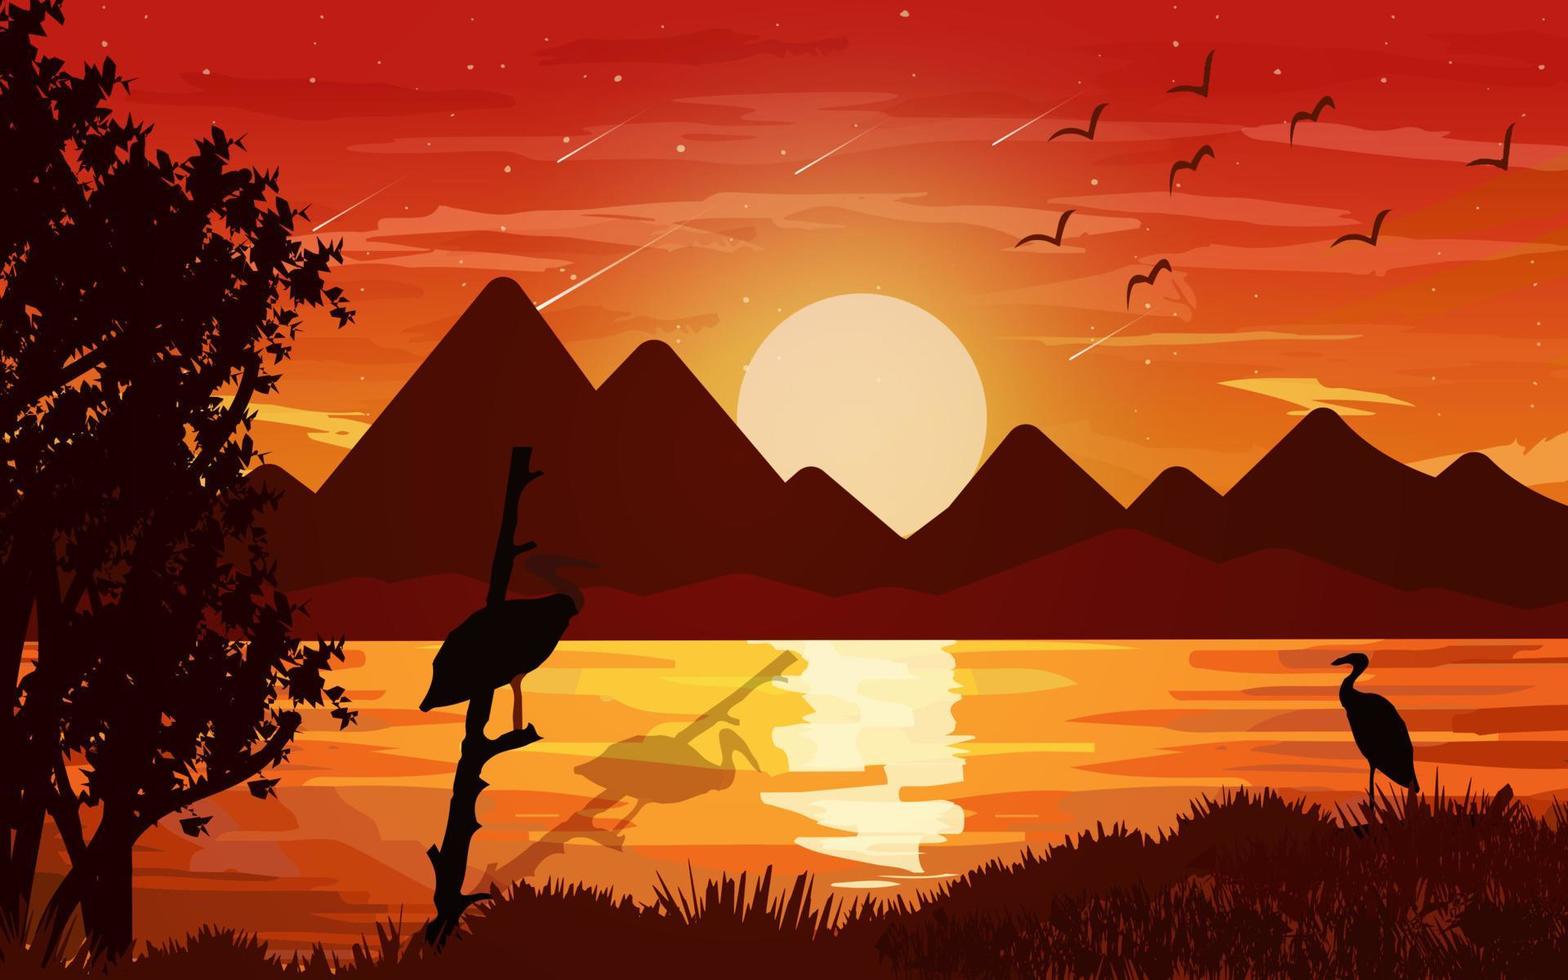 Sunset scene in forest. Glowing forest sky with Mountains and birds landscape background Illustration Mountains vector